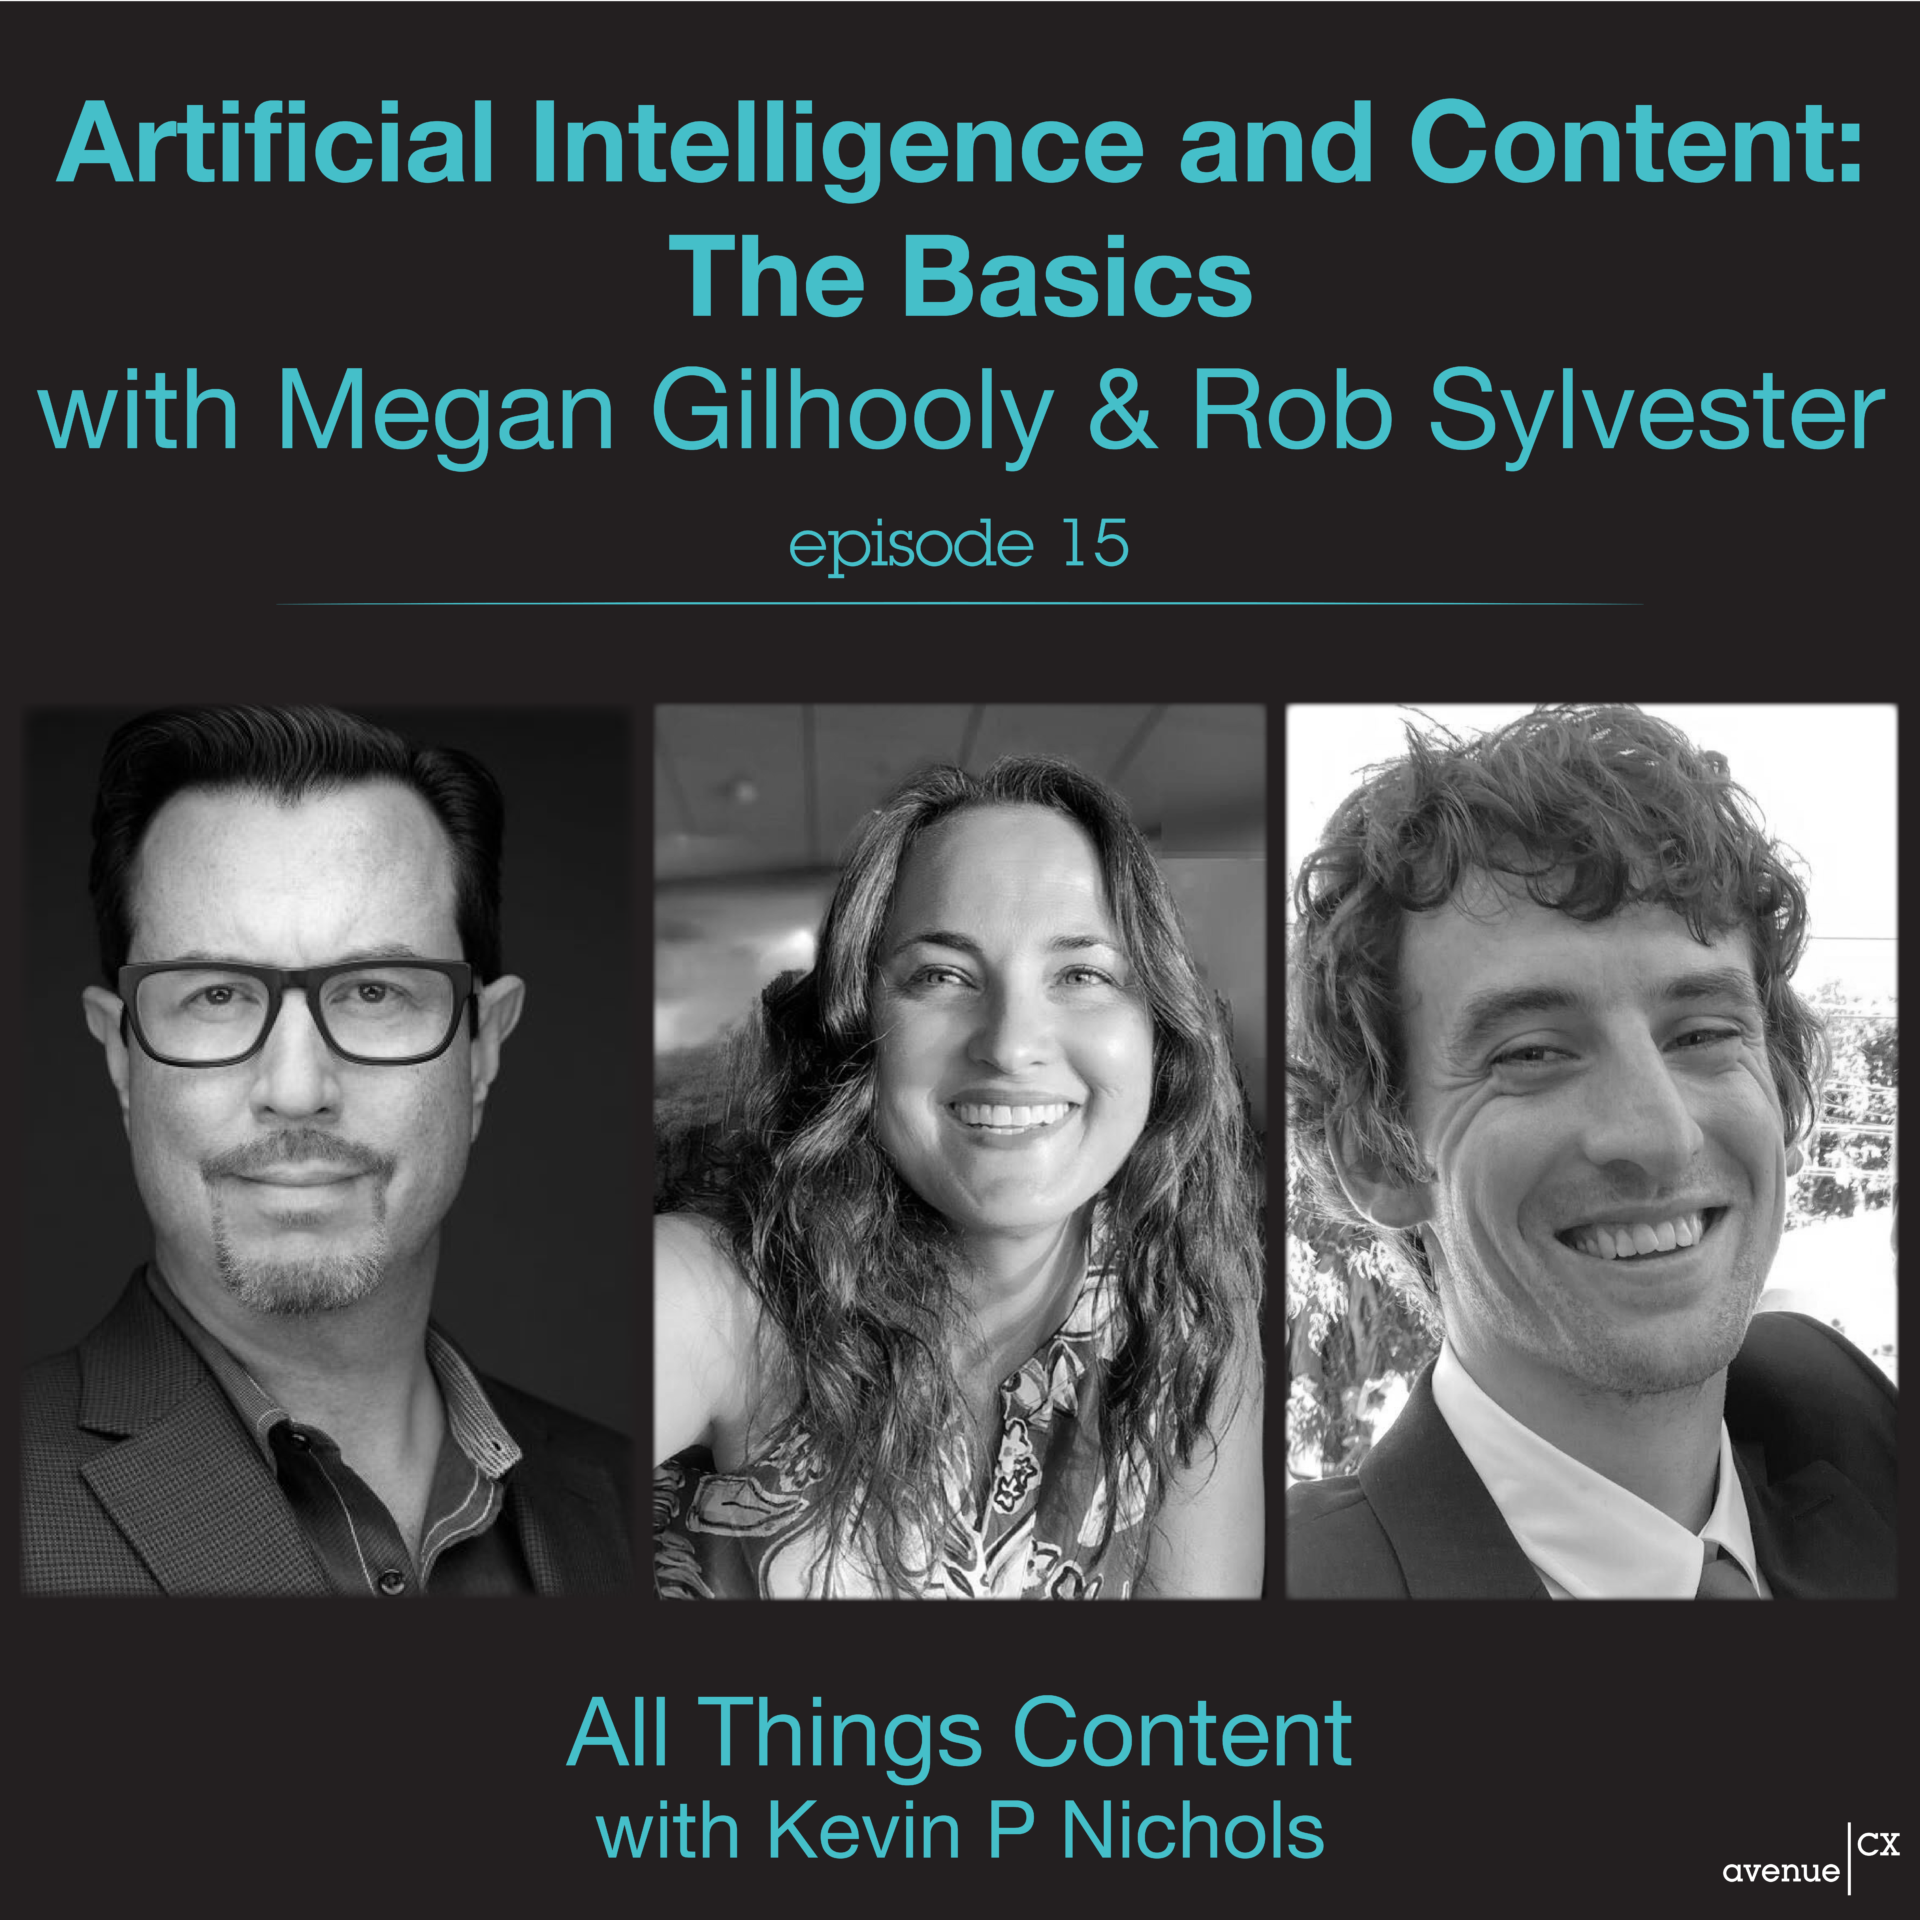 All Things Content - Artificial Intelligence and Content The Basics with Megan Gilhooly and Rob Sylvester.